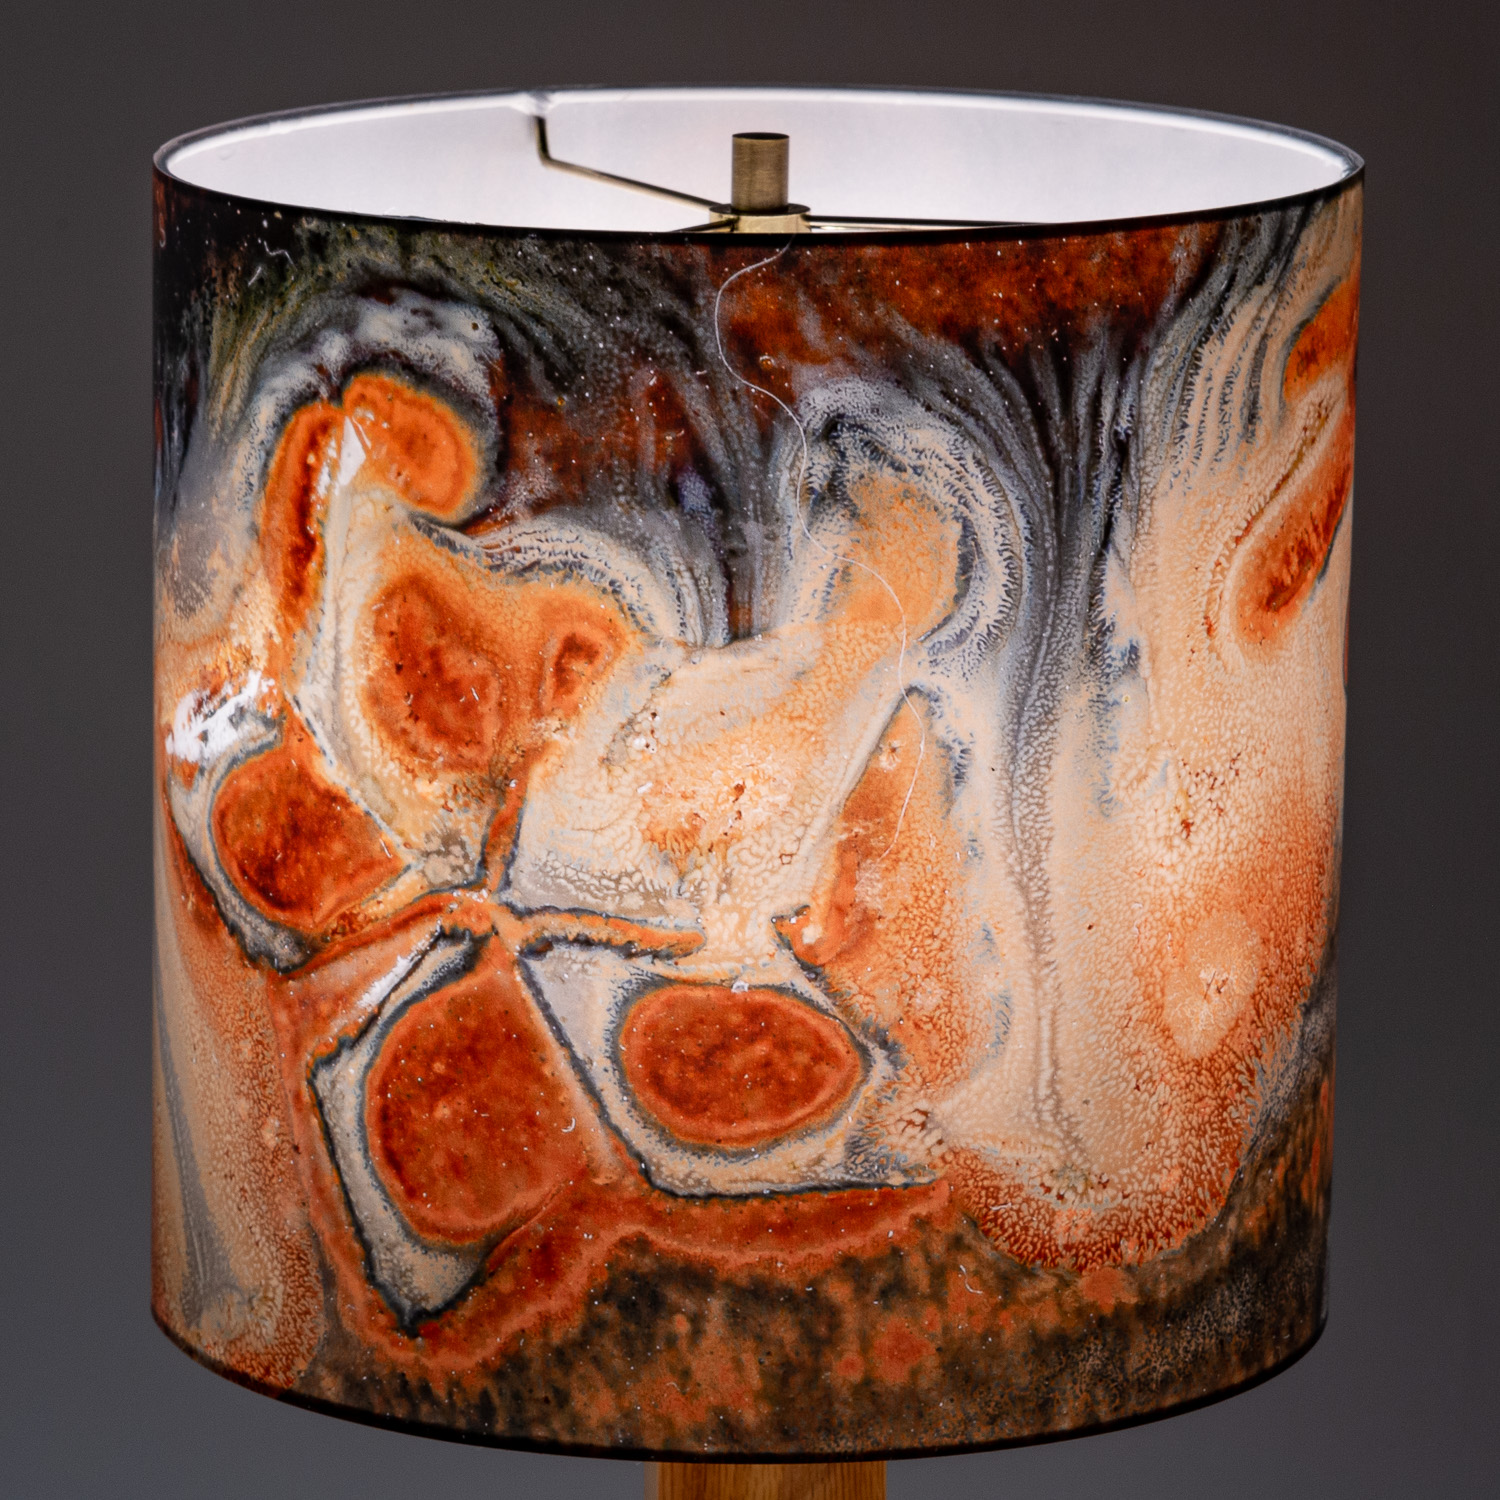 108: Closeup image of reduction-fired pottery by Scott Frankenberger  -- Photo on Lamp shade by David Elmore